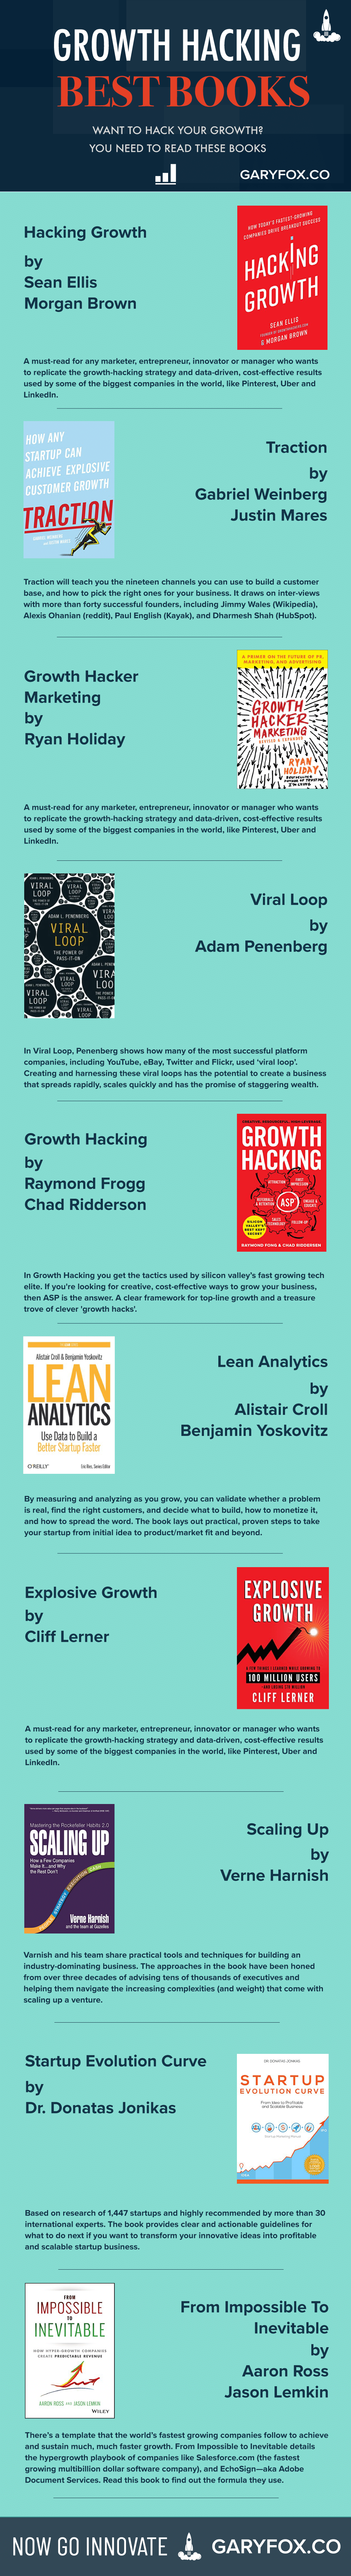 growth hacking books infographic